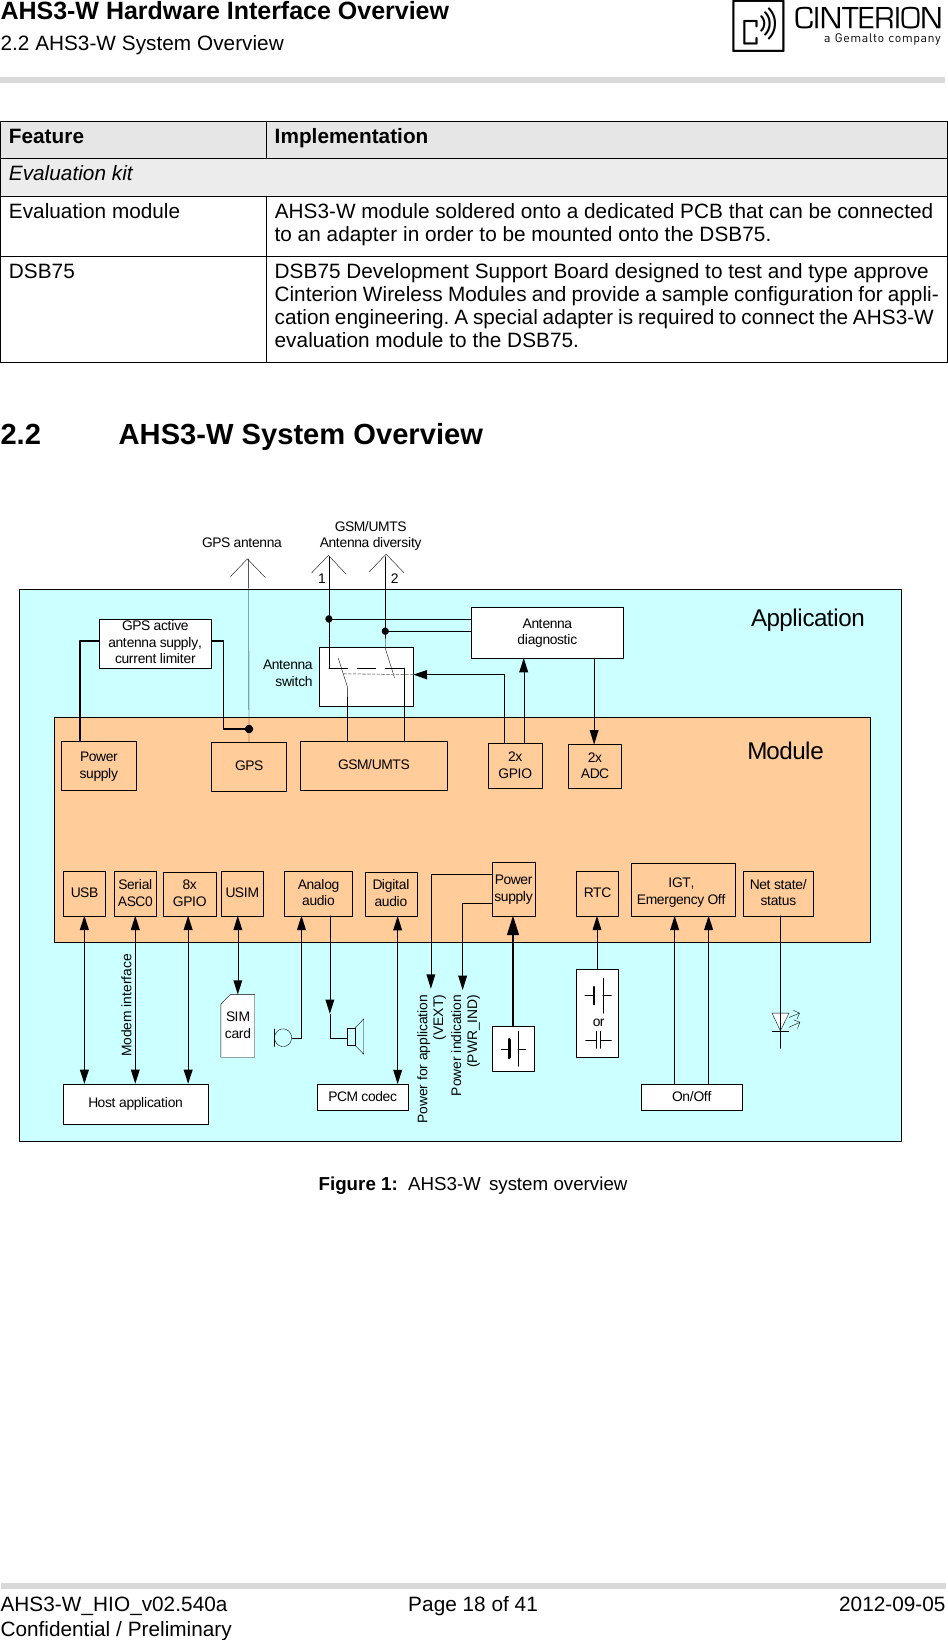 AHS3-W Hardware Interface Overview2.2 AHS3-W System Overview18AHS3-W_HIO_v02.540a Page 18 of 41 2012-09-05Confidential / Preliminary2.2 AHS3-W System OverviewFigure 1:  AHS3-W system overviewEvaluation kitEvaluation module AHS3-W module soldered onto a dedicated PCB that can be connected to an adapter in order to be mounted onto the DSB75.DSB75  DSB75 Development Support Board designed to test and type approve Cinterion Wireless Modules and provide a sample configuration for appli-cation engineering. A special adapter is required to connect the AHS3-W evaluation module to the DSB75.Feature ImplementationUSB SerialASC0 USIM AnalogaudioPowersupply RTC IGT,Emergency Off Net state/statusSIMcardHost application On/OffModuleApplicationorGSM/UMTS Antenna diversityPower for application (VEXT)Power indication(PWR_IND)Modem interfaceDigitalaudioPCM codecGSM/UMTS12GPSGPS antenna8xGPIO2xGPIOAntenna diagnostic2xADCAntenna switchPower supplyGPS active antenna supply, current limiter